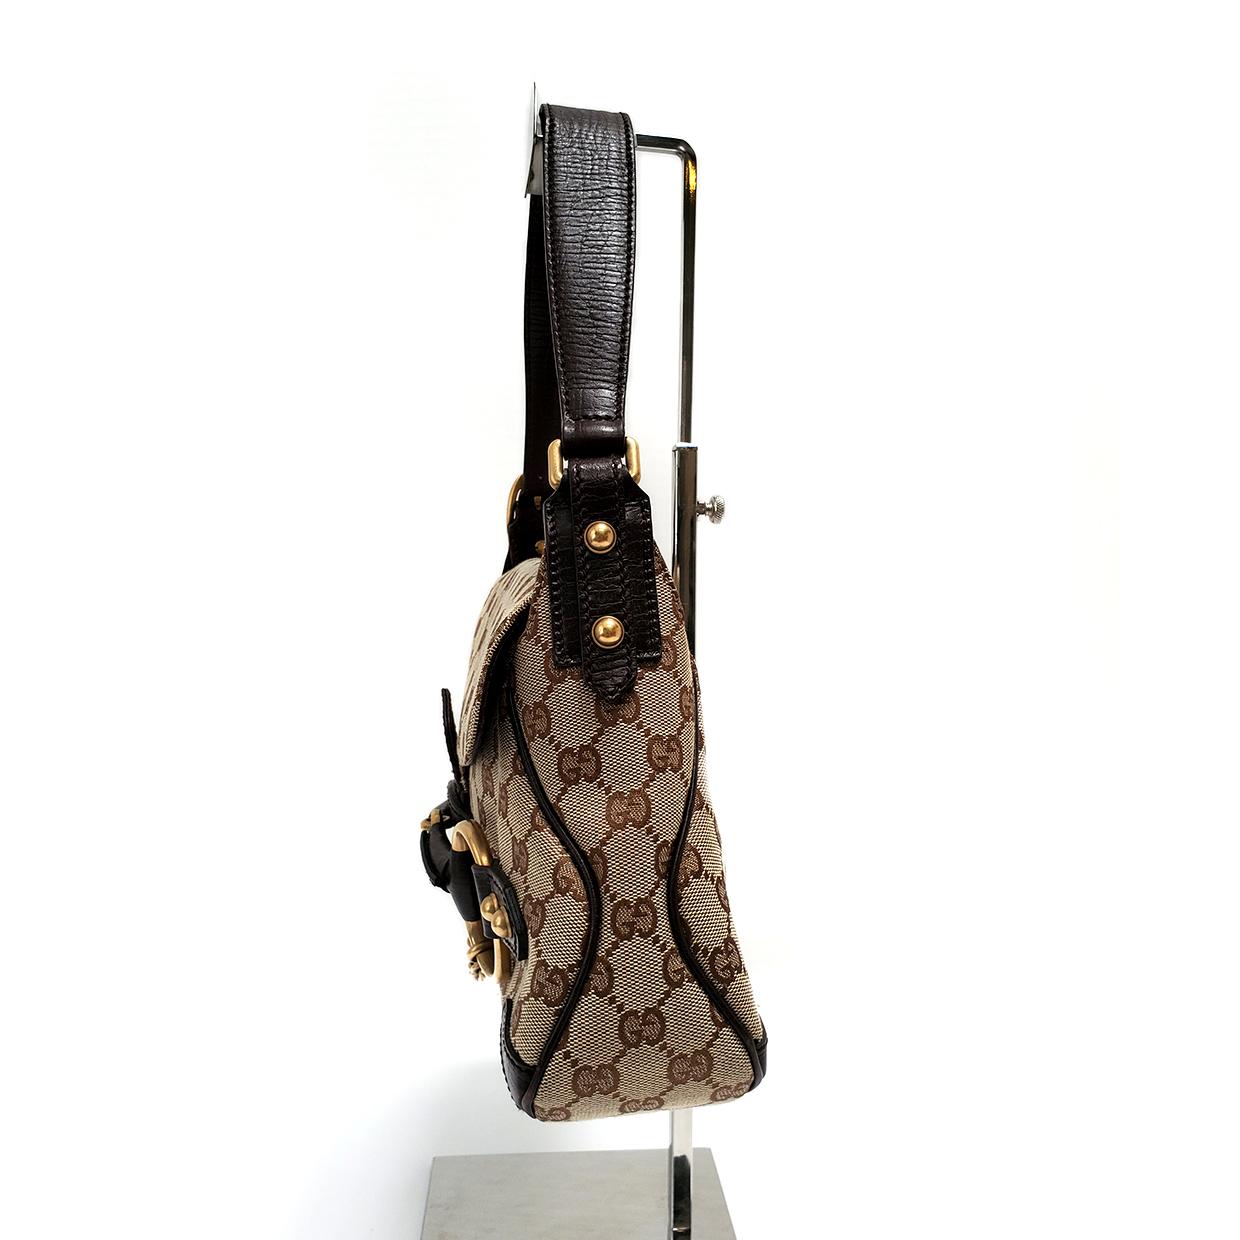 Brand - Gucci
Collection - Horsebit Chain
Estimated Retail - $760.00
Style - Shoulder Bag
Material - Canvas
Color - Brown
Pattern - GG Canvas
Closure - Flap
Hardware Material - Goldtone
Comes With - Dustbag
Size - Medium
Feature - Inner